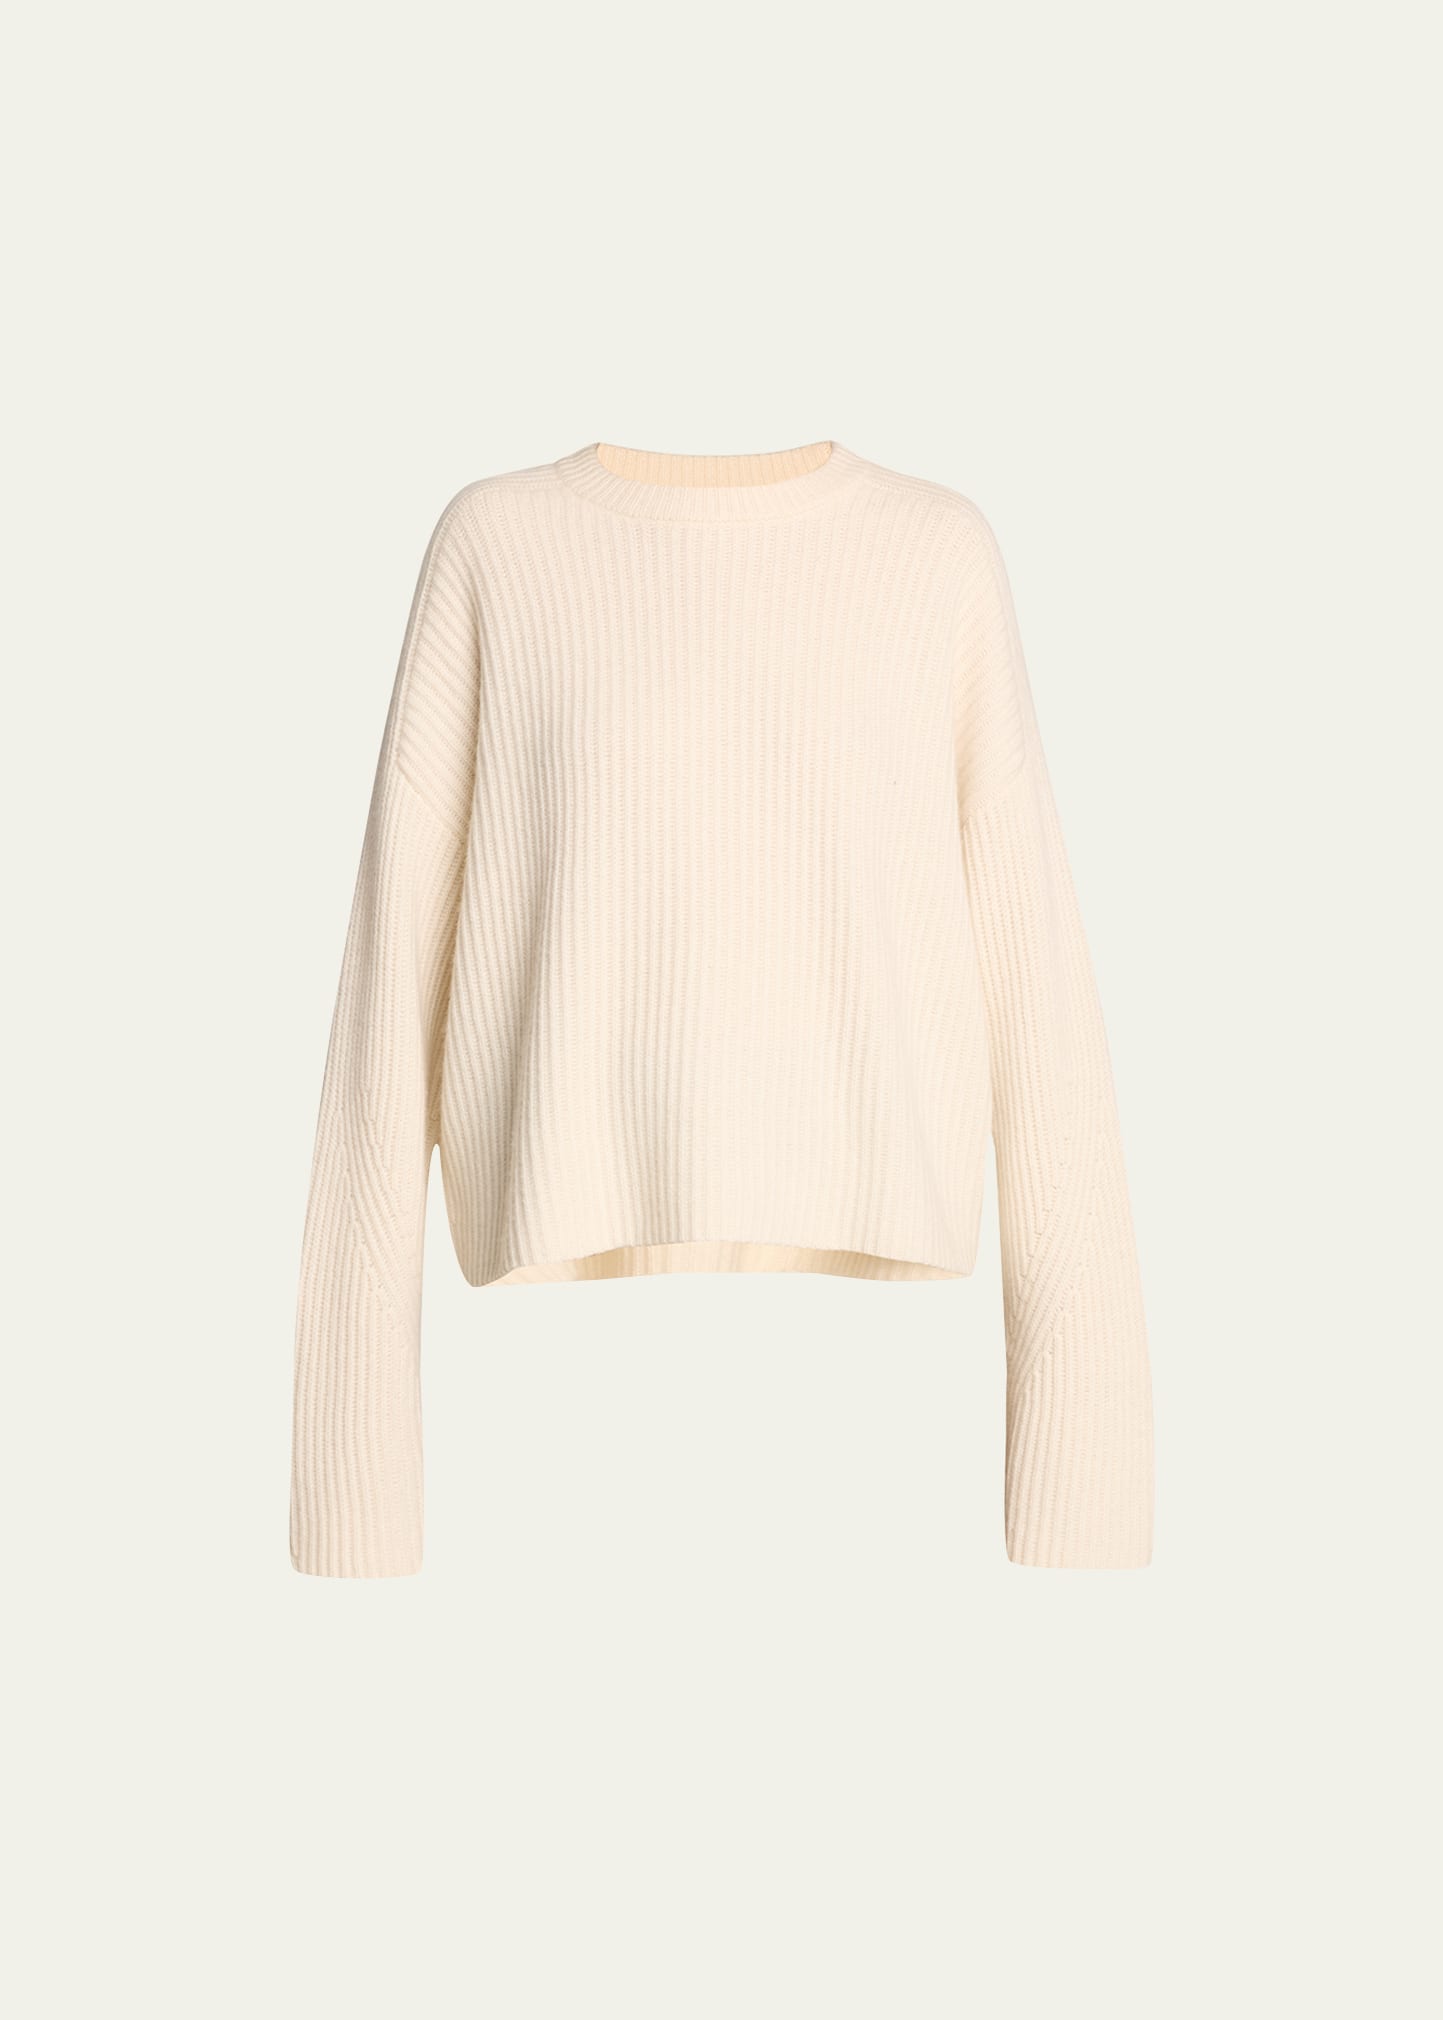 Loulou Studio Ribbed Cashmere Sweater In Ivory